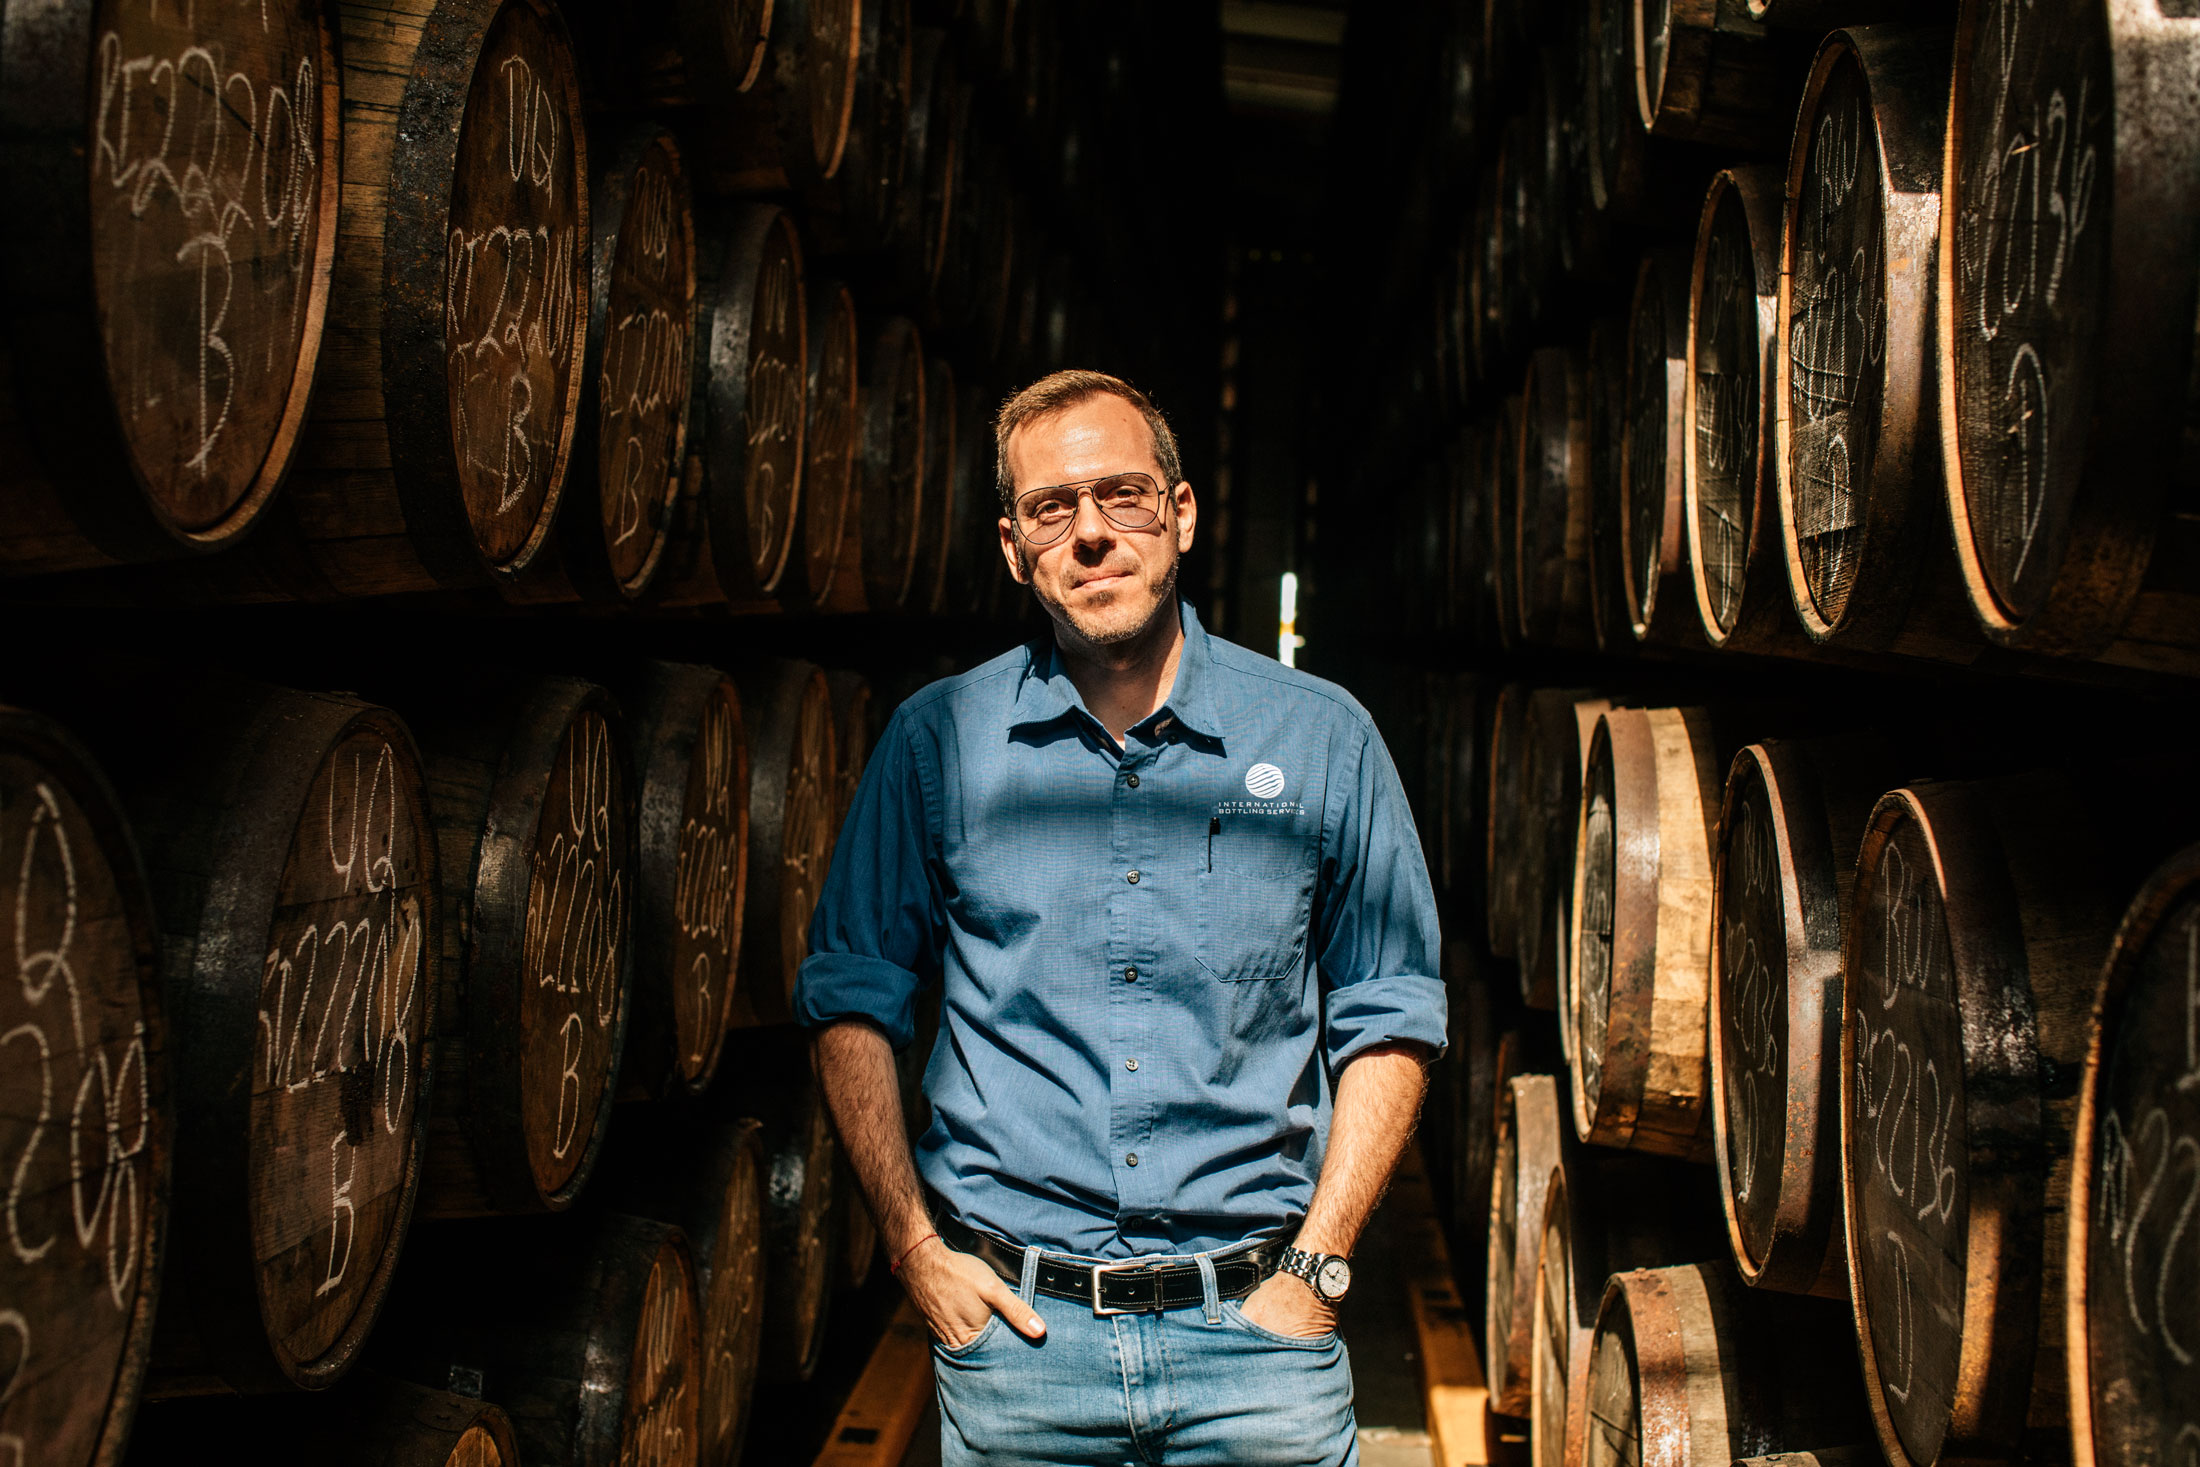 Gian Guido Arditi at the Ron Diplomático facility in Panama City, standing by barrels of aging rum.